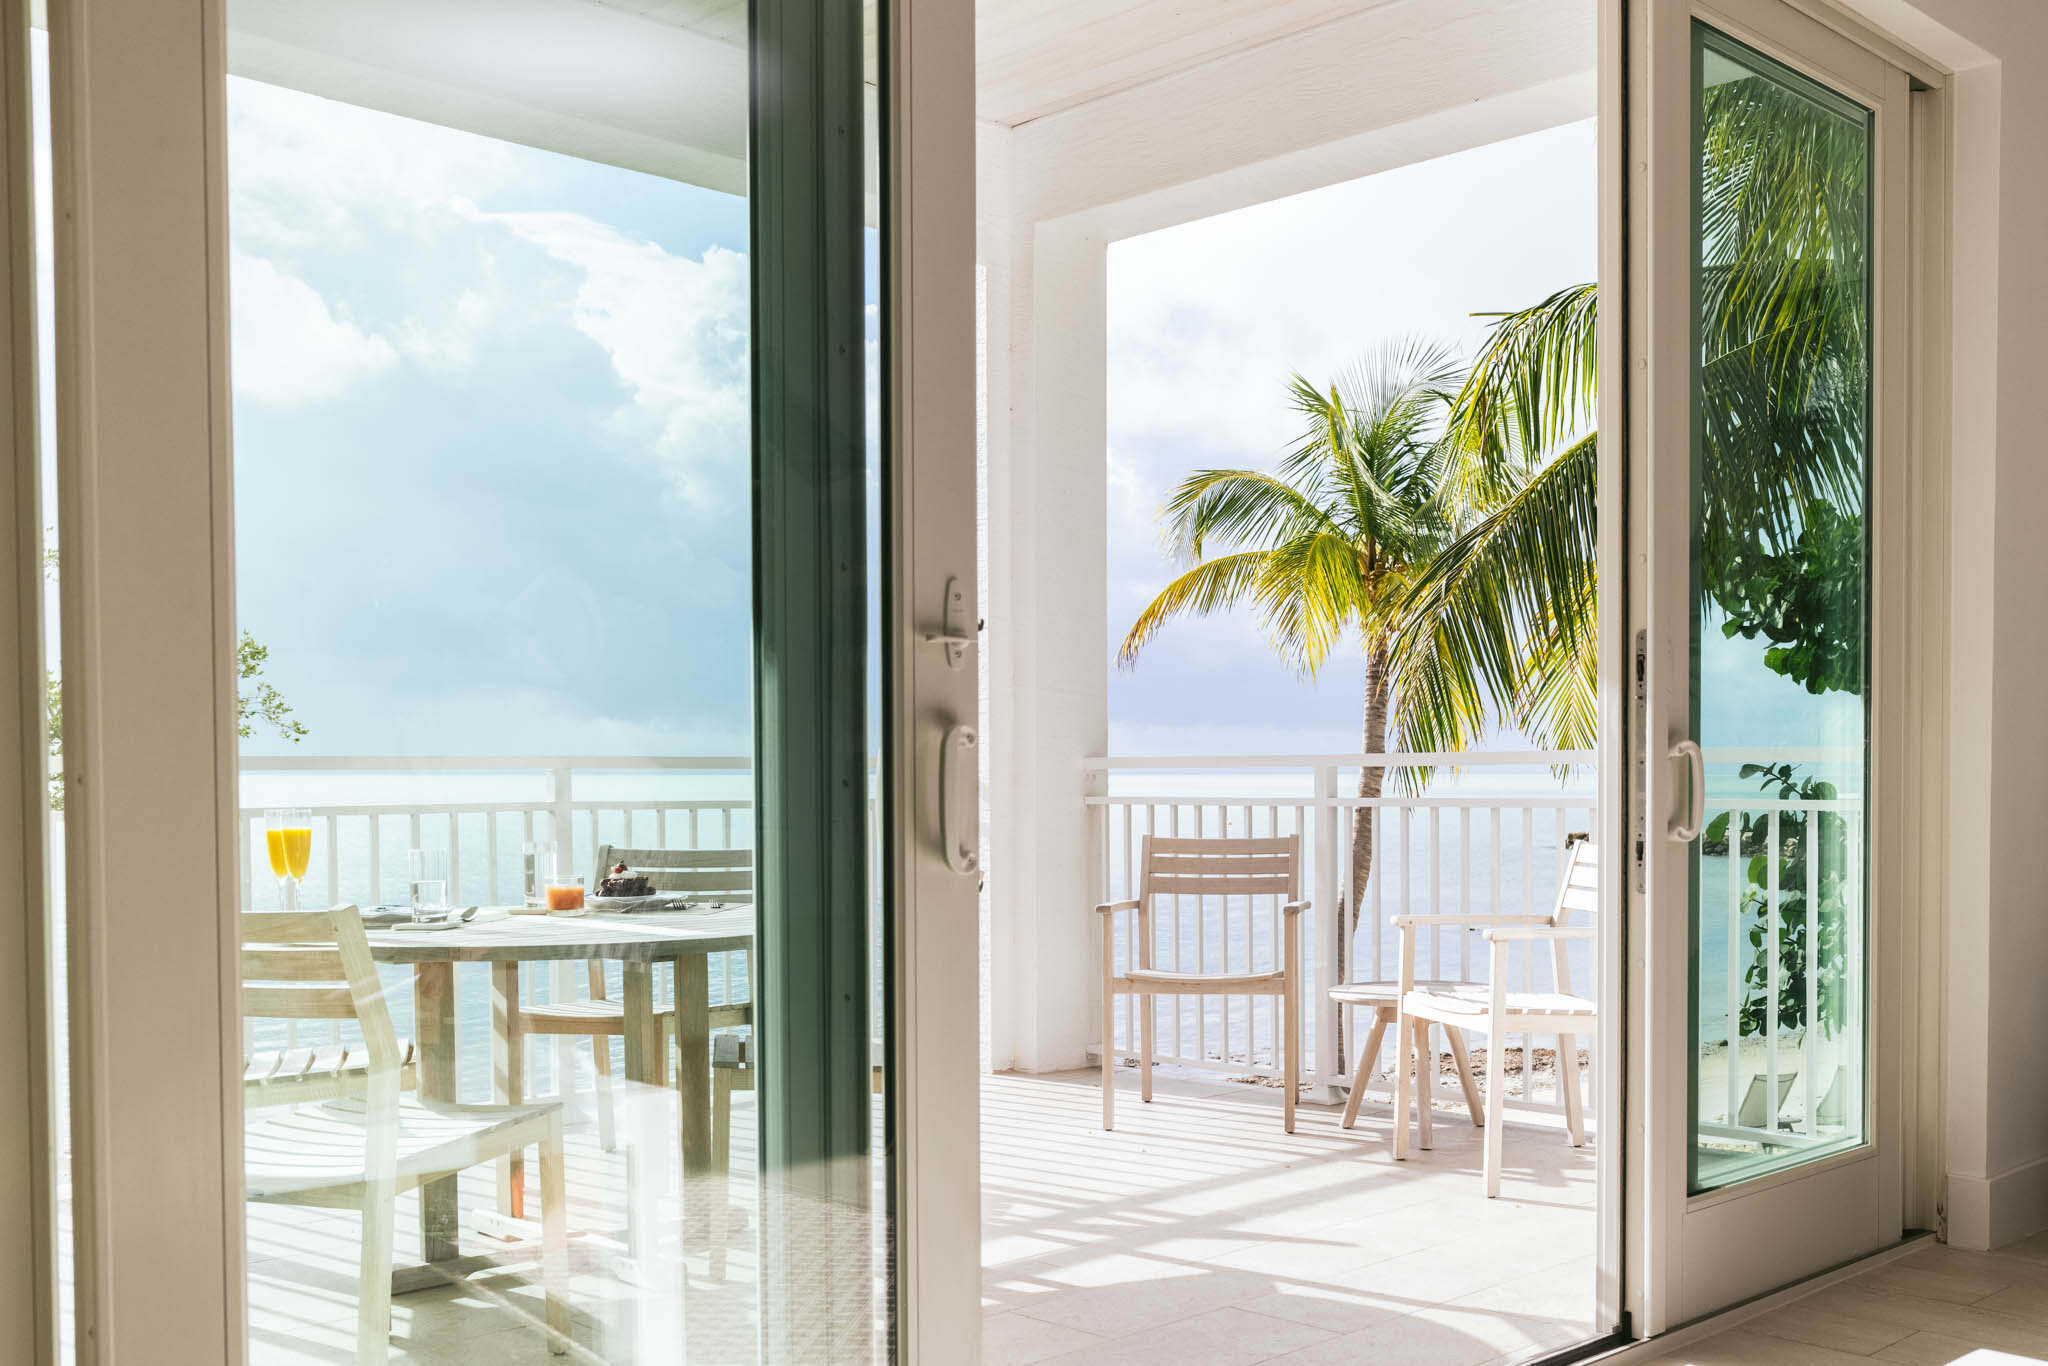  Sliding glass door to the ocean view covered balcony on the first floor of an Islands waterfront villa. 